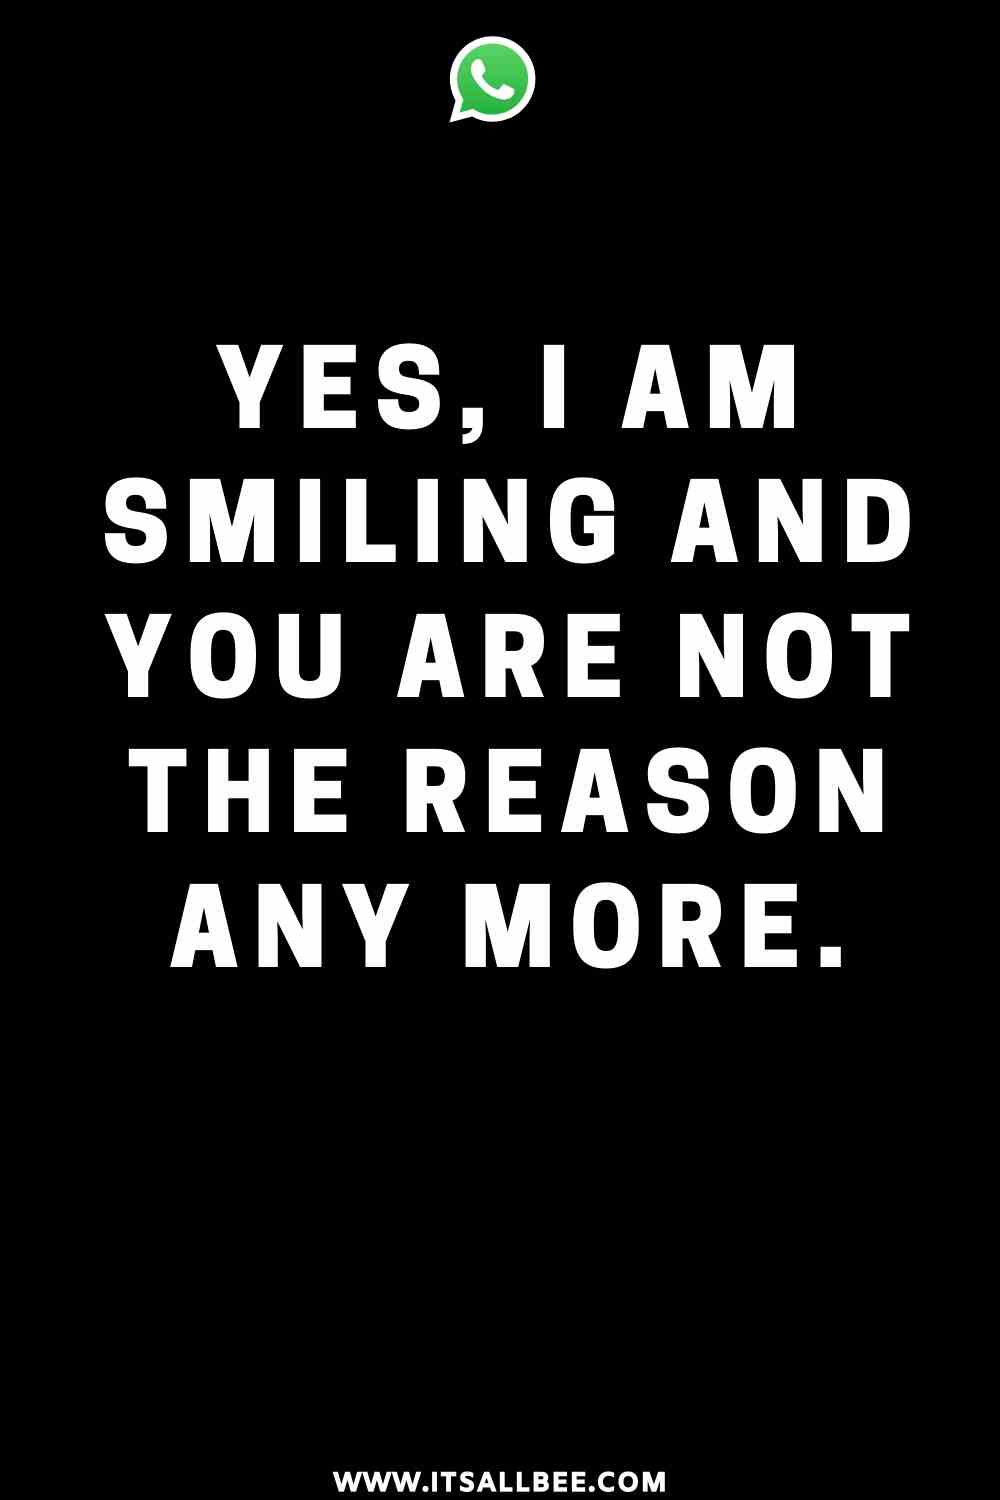 Whatsapp status - yes, i am smiling and you are not the reason any more.